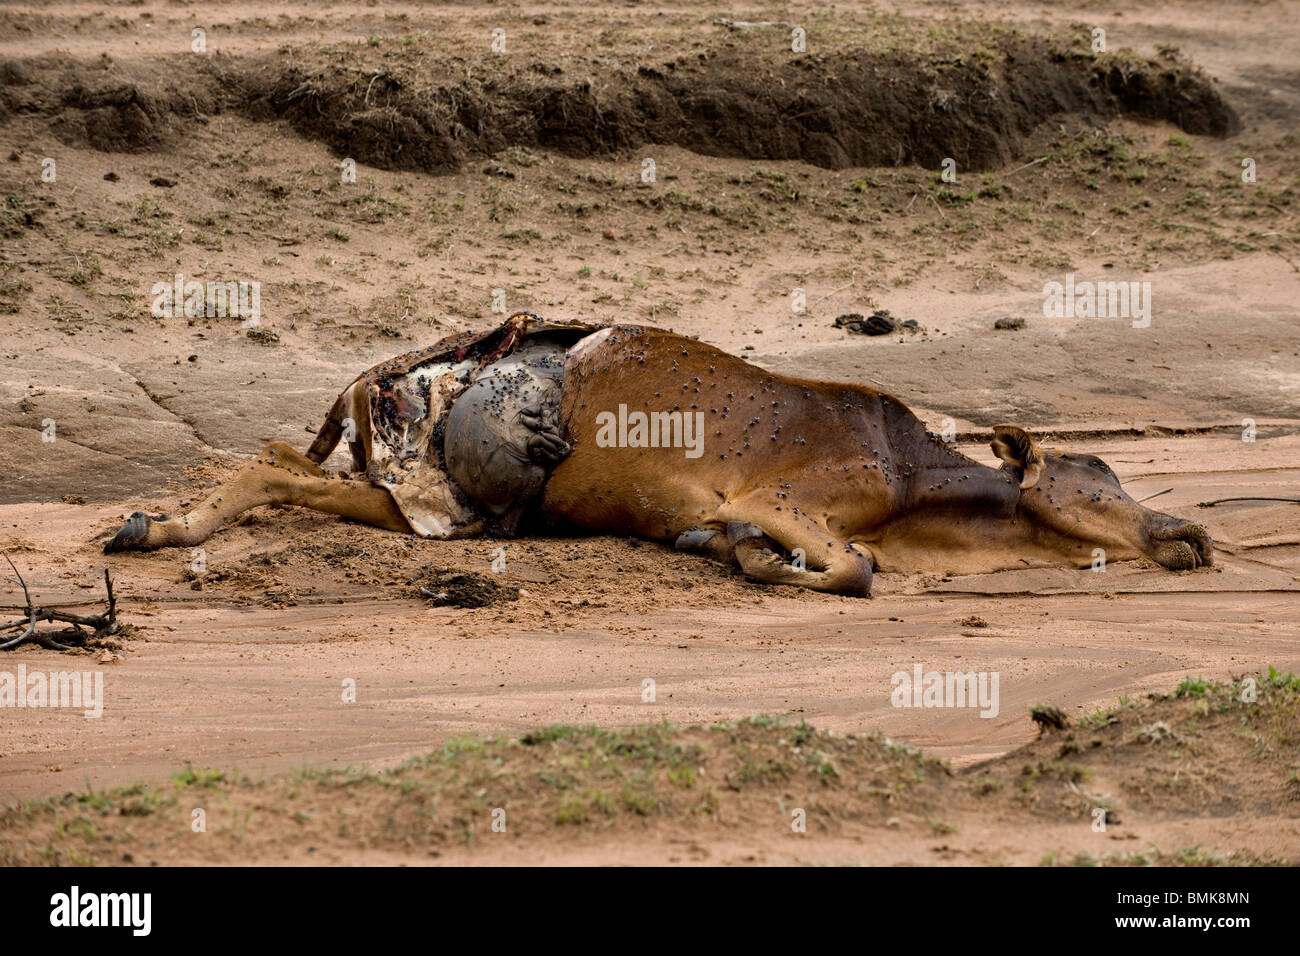 Dead cow on the ground, Tanzania, Africa Stock Photo